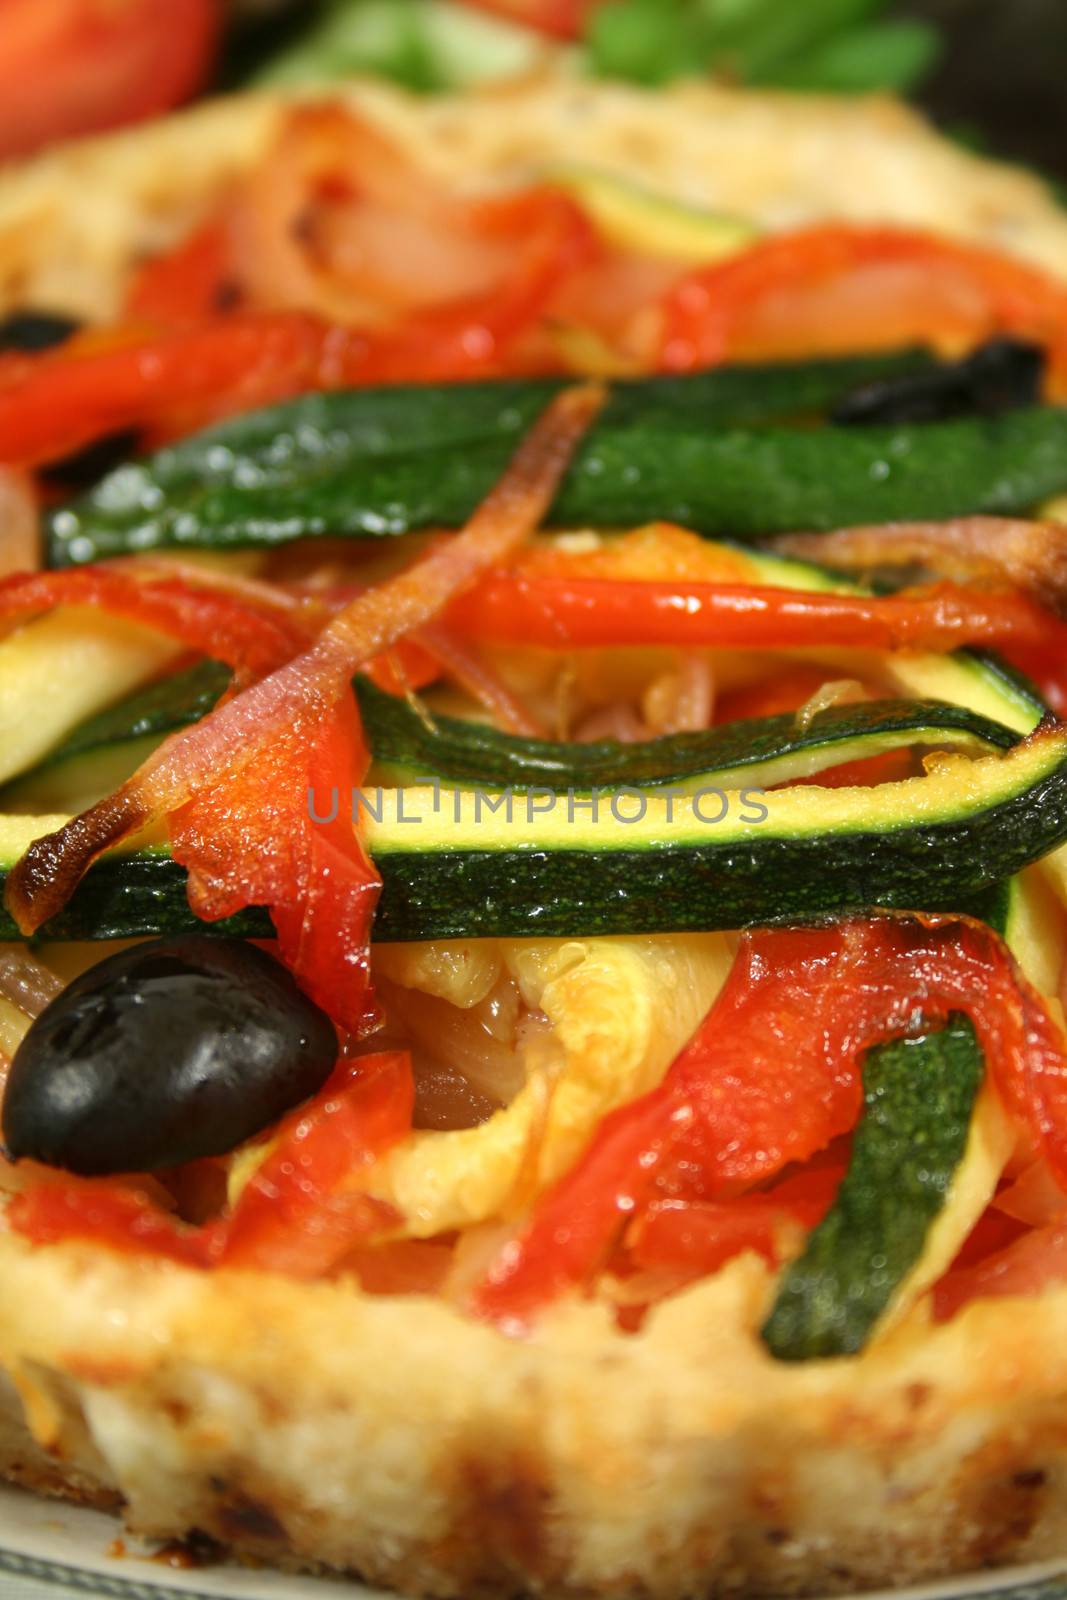 Delicious Mediterranean style vegetable and ricotta tart.